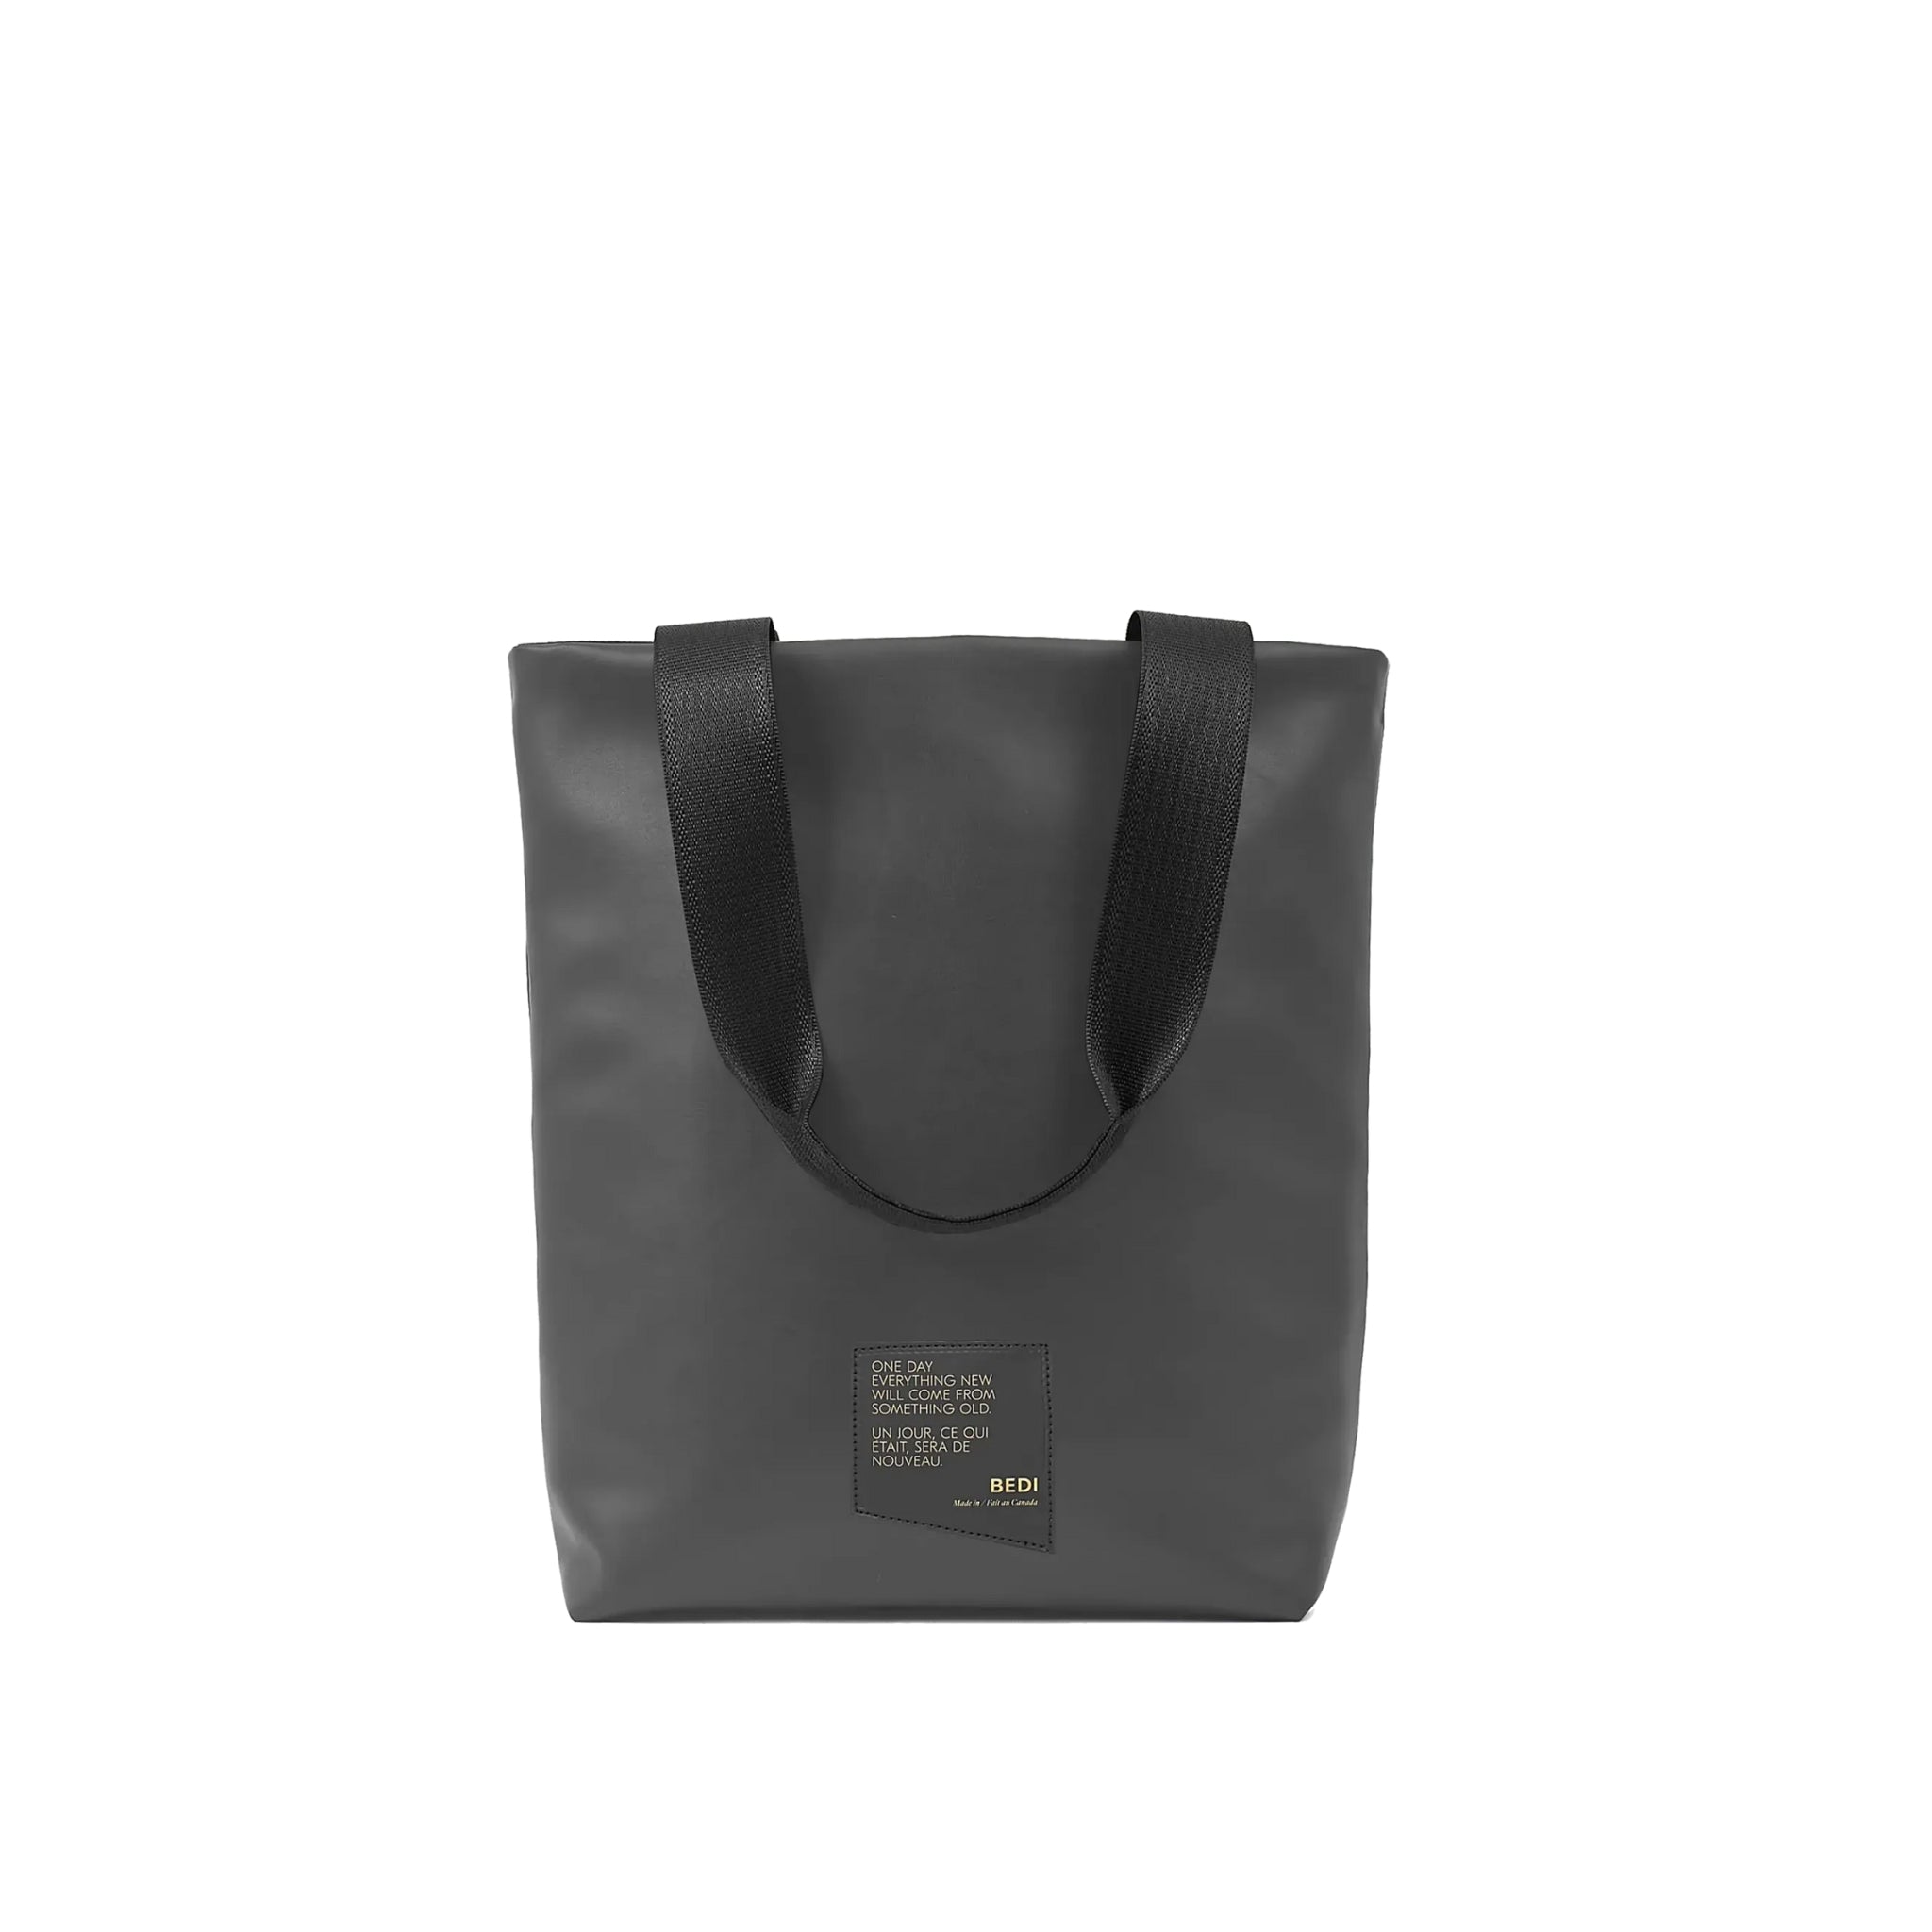 Front view of utilitarian style medium sized tote in grey vegan leather (Desserto), on white background.